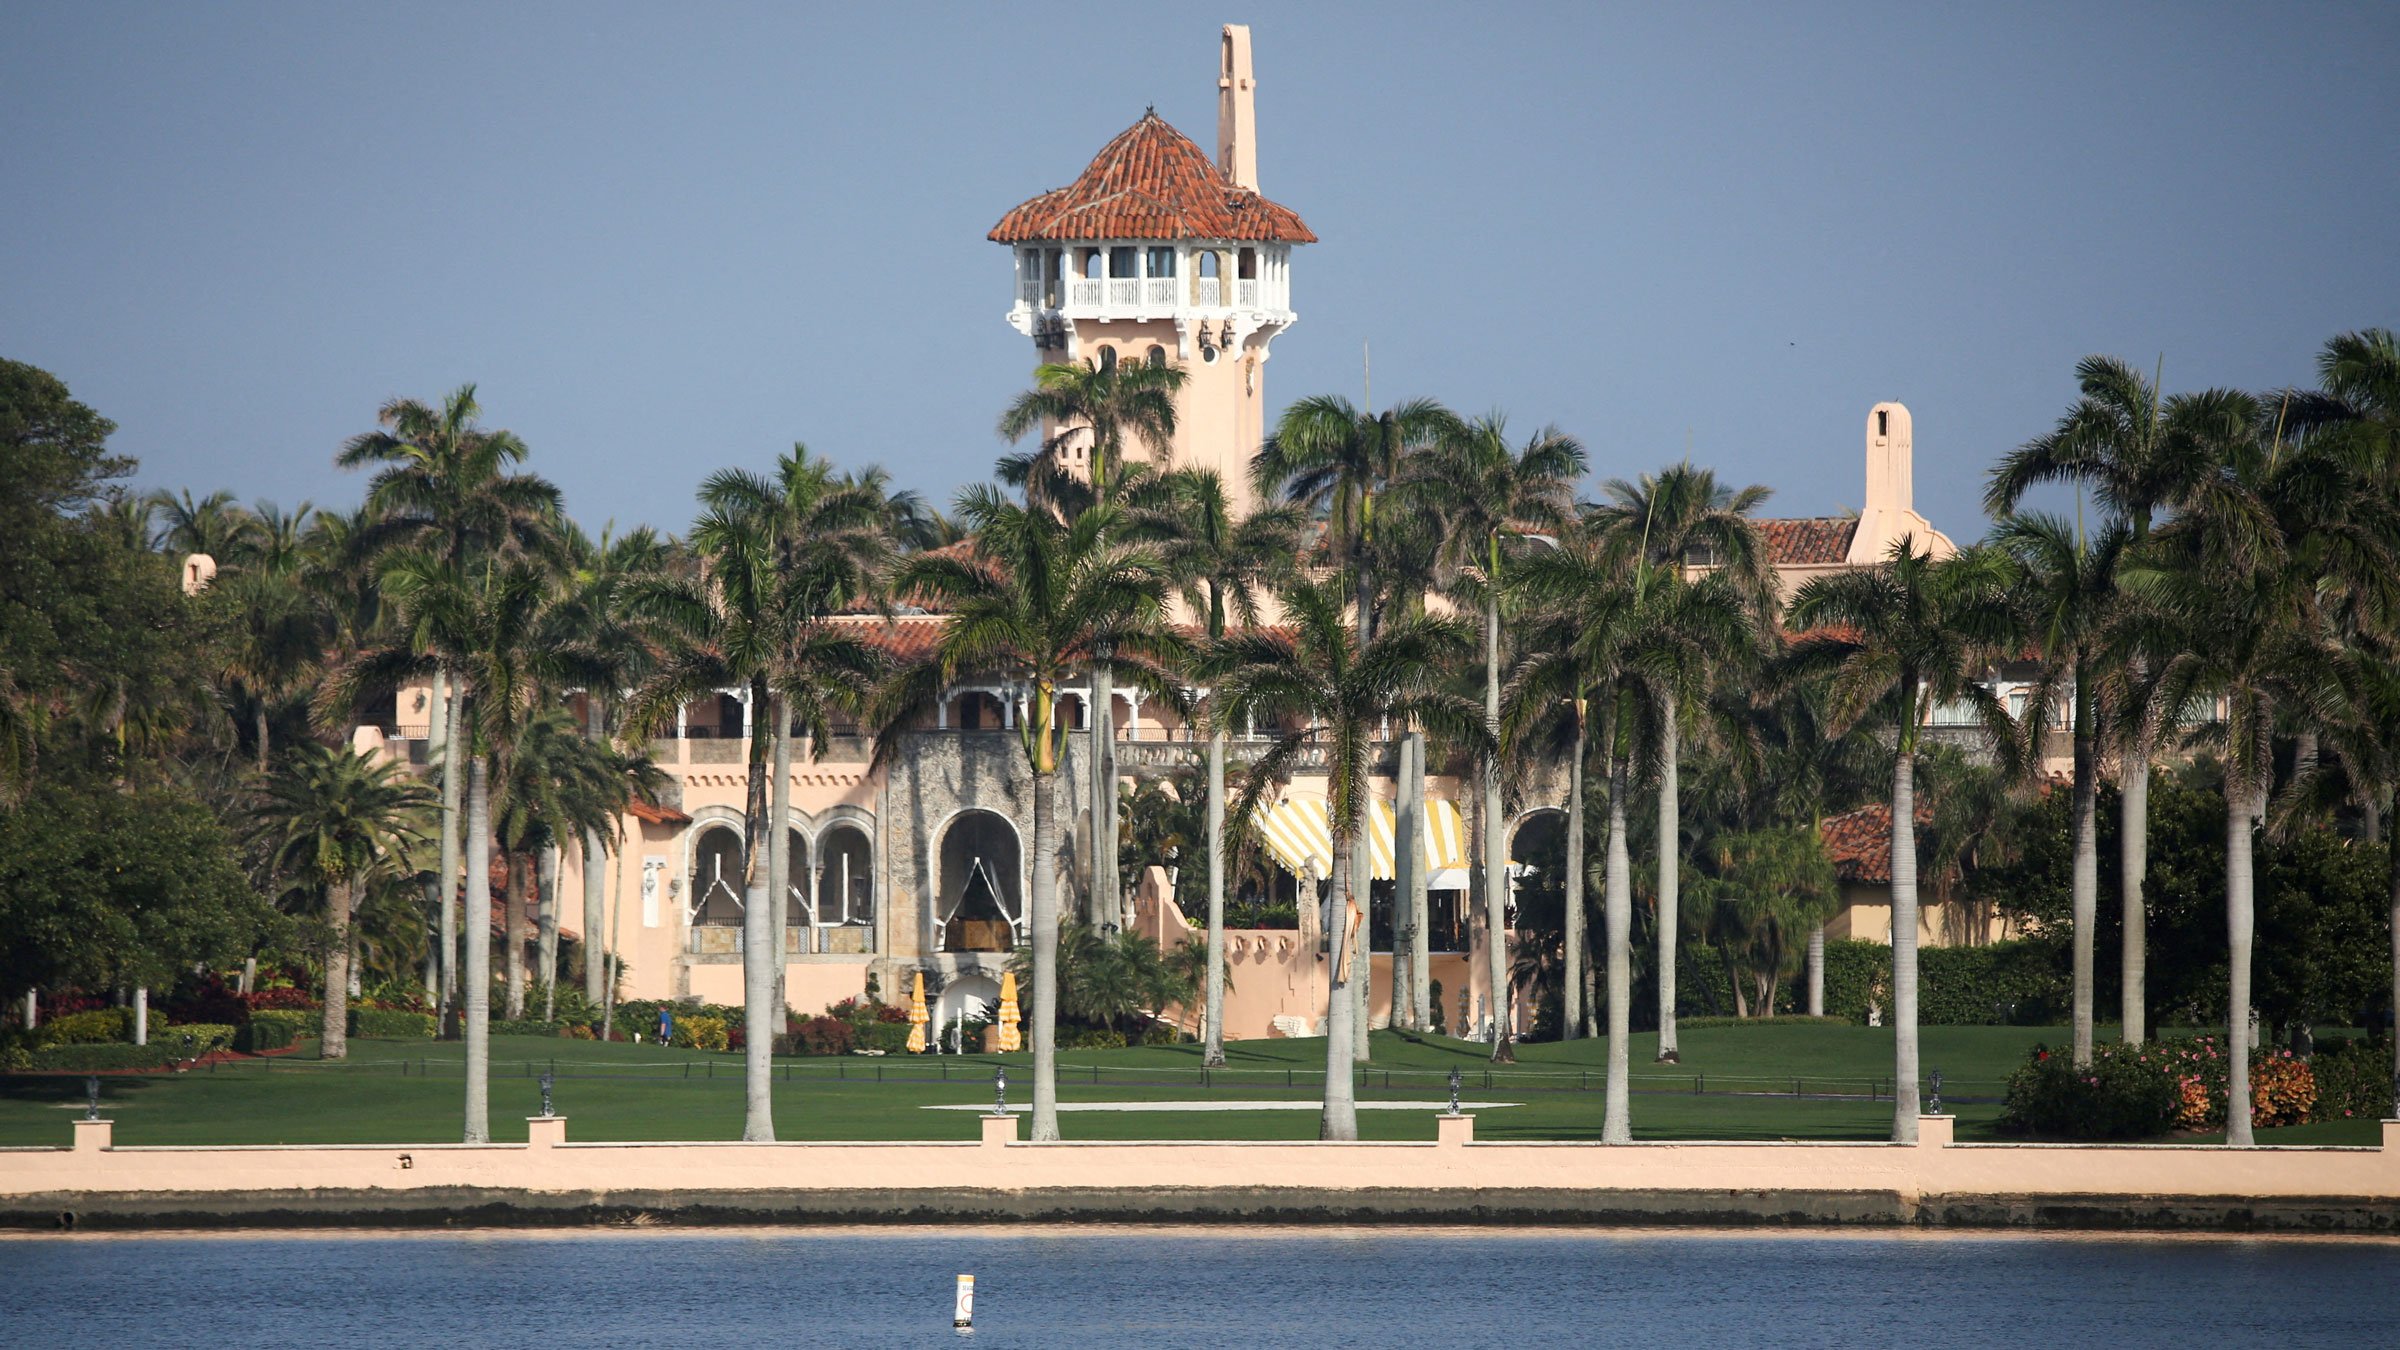 A view of former President Trump's Mar-a-Lago resort in Palm Beach, Florida.